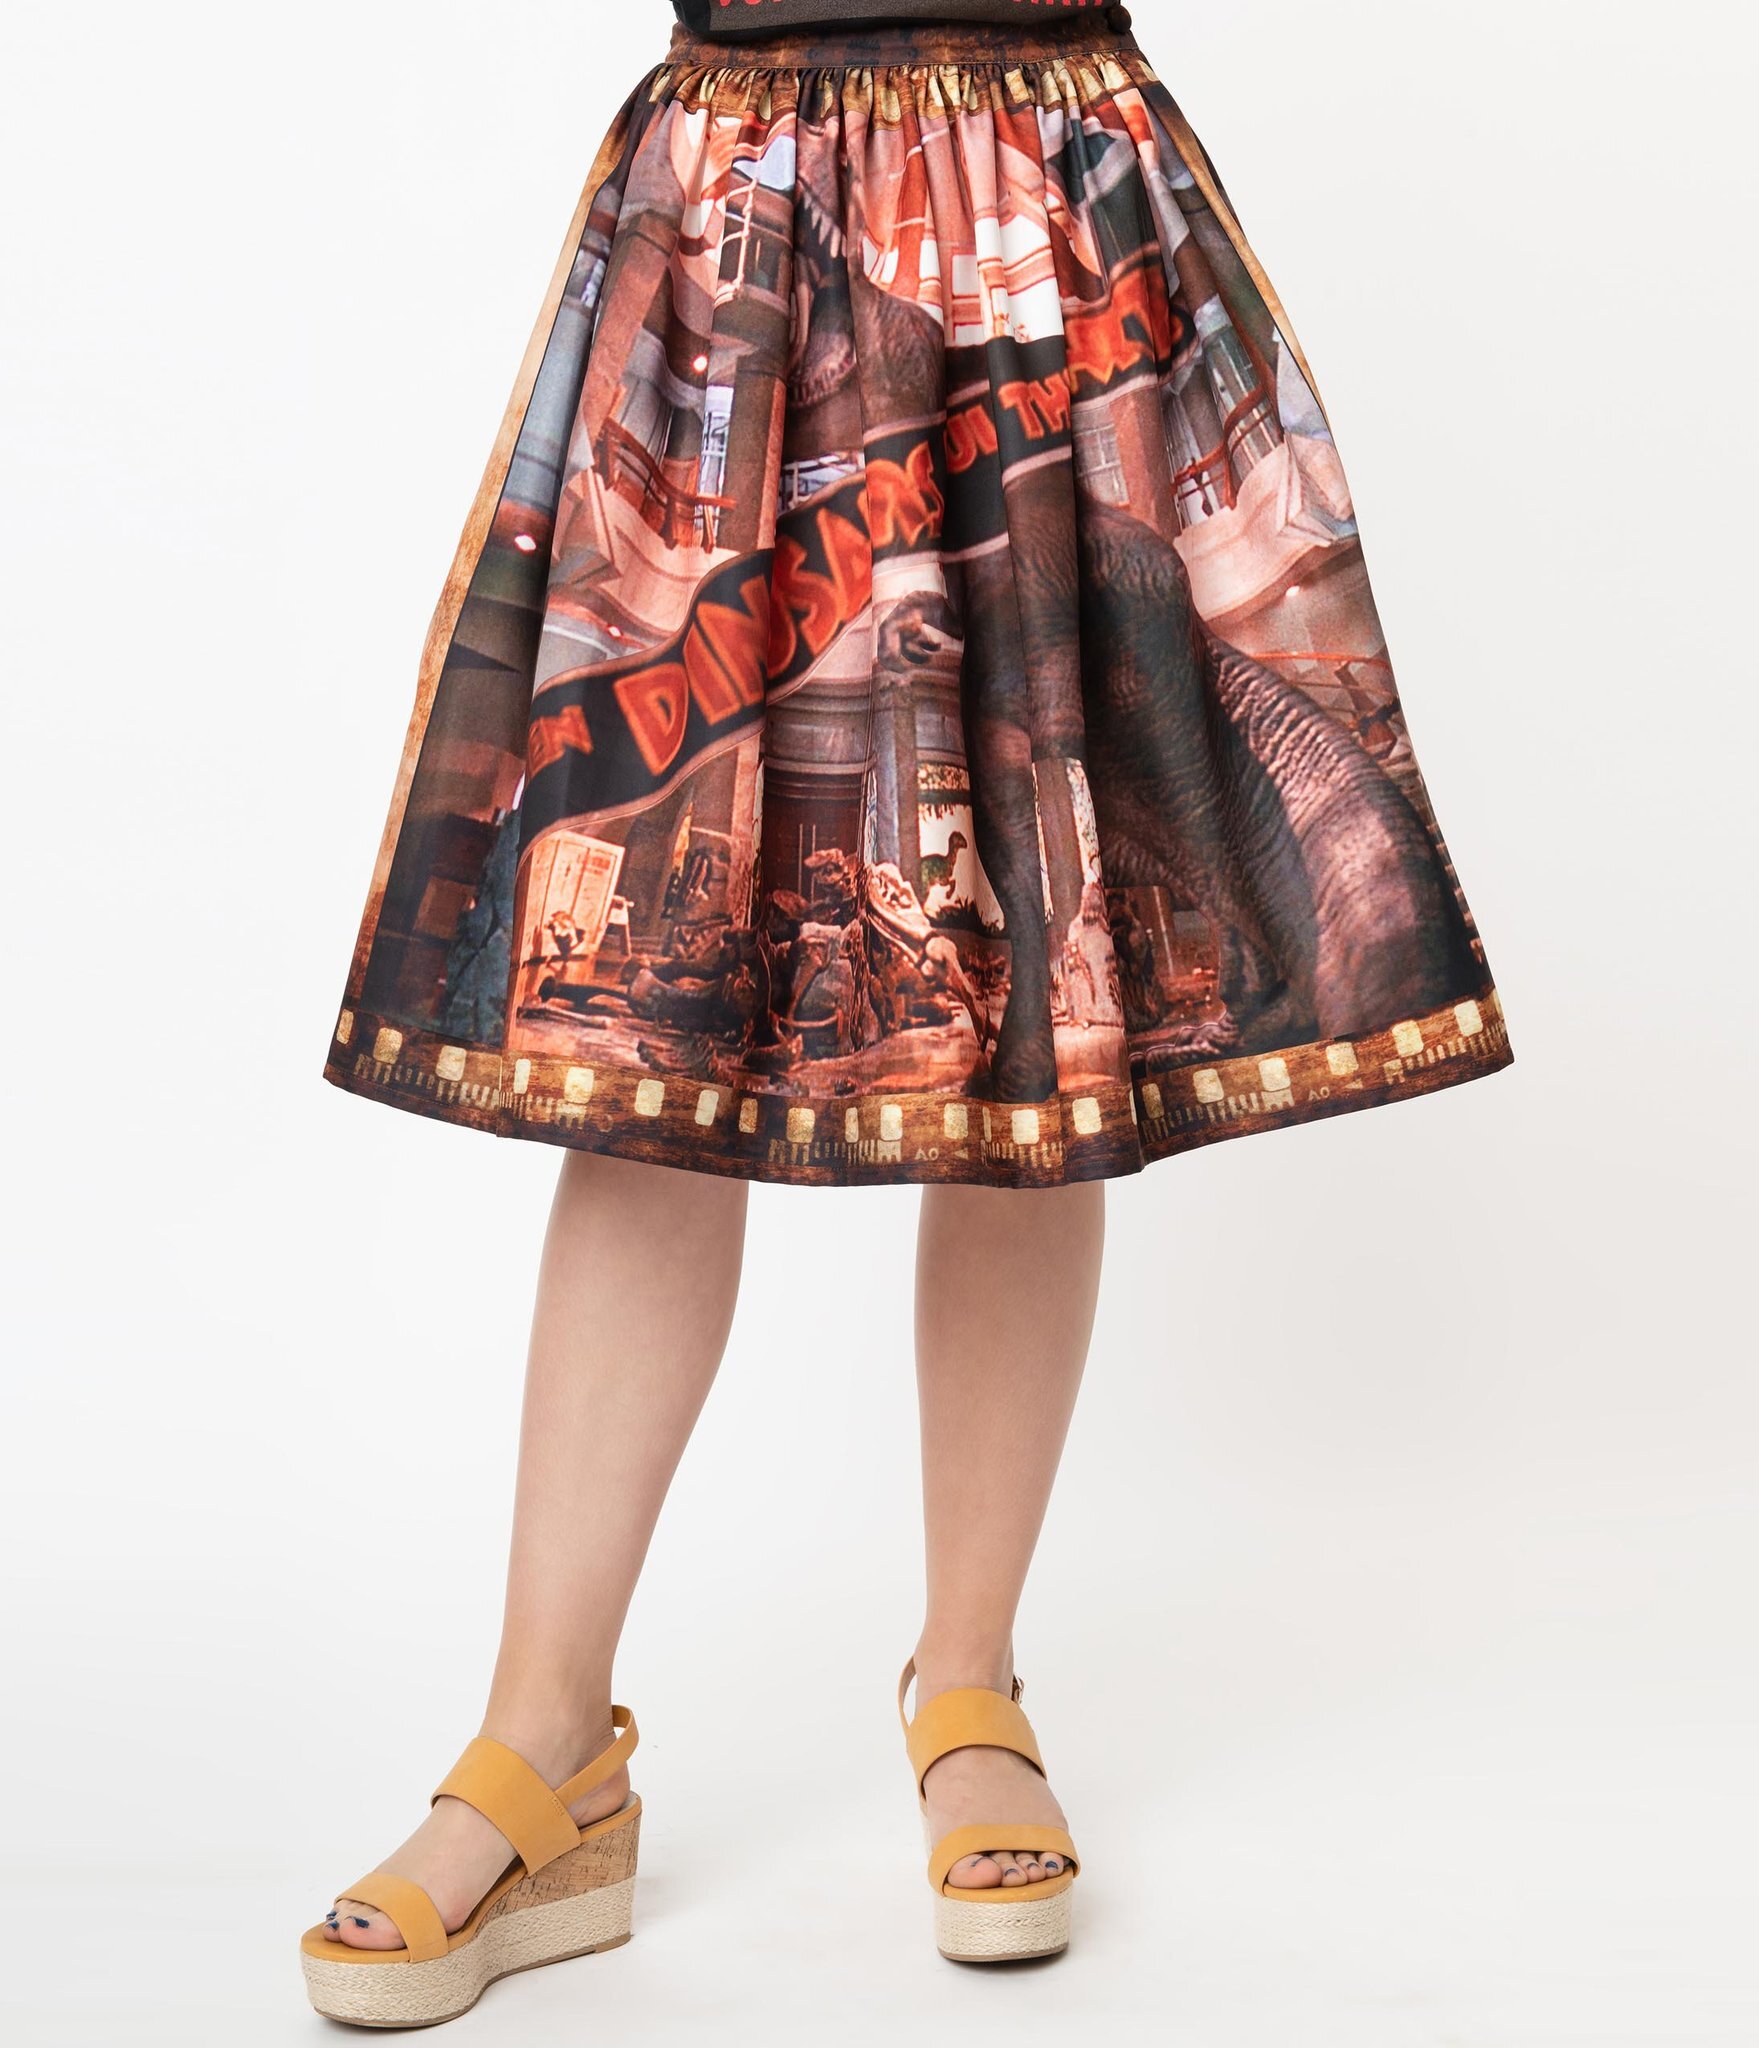 Jurassic Park x Unique Vintage When Dinosaurs Ruled The Earth Swing Skirt